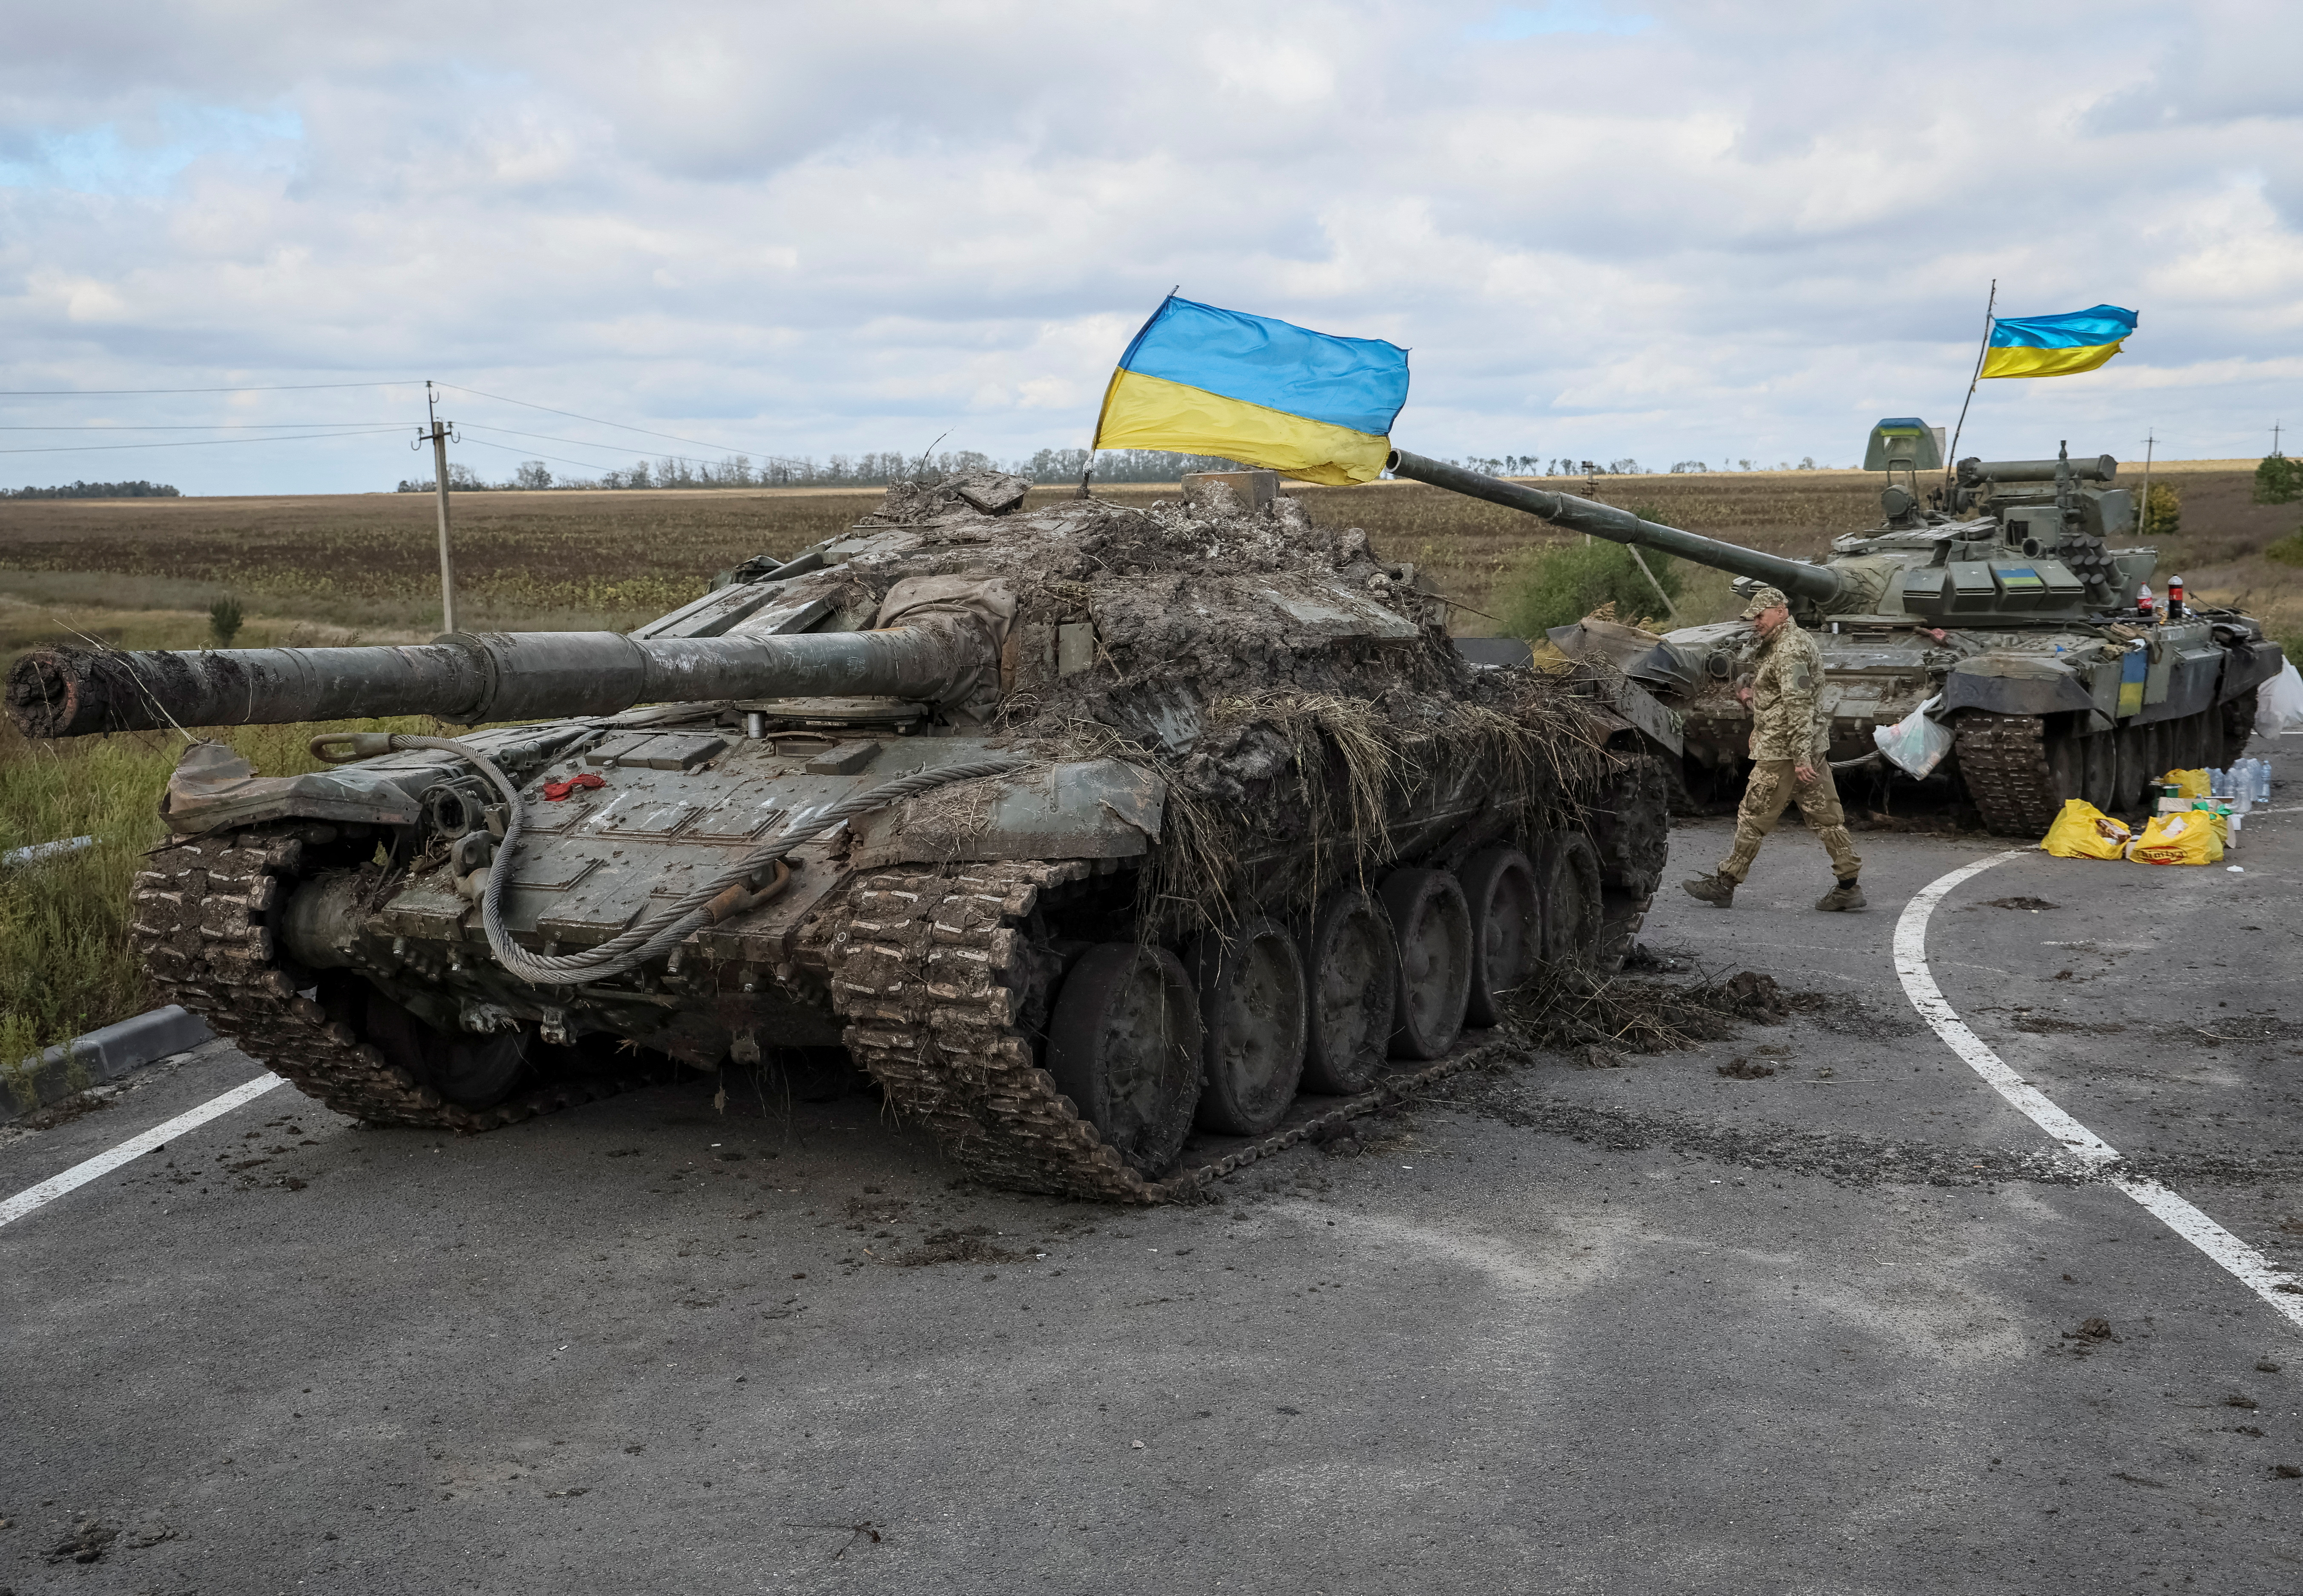 Russian tanks destroyed in the areas recovered by Ukraine (Reuters)